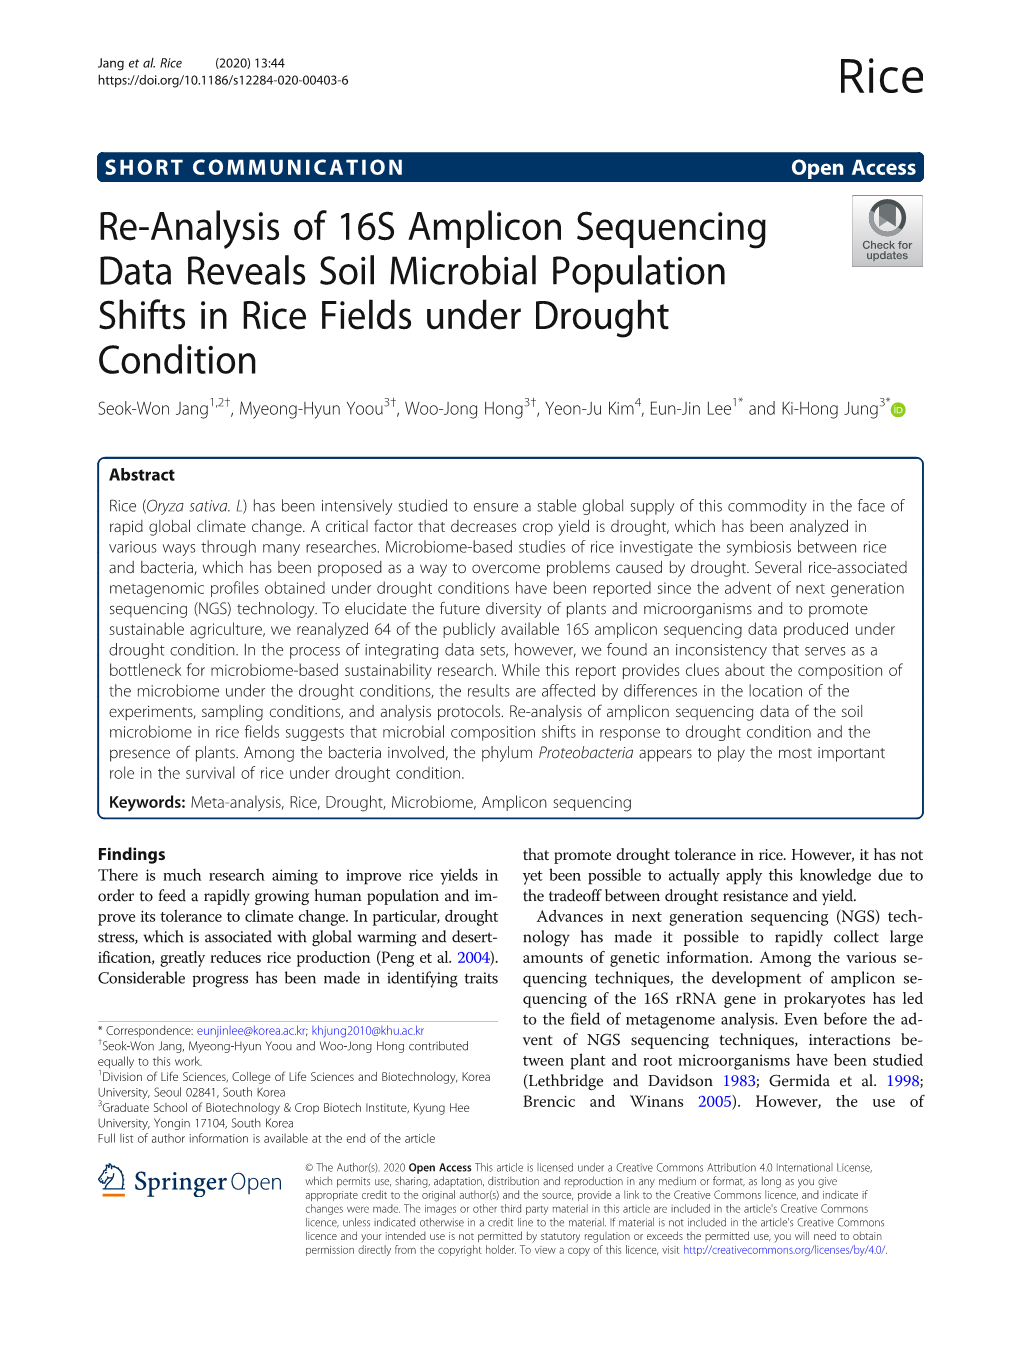 Re-Analysis of 16S Amplicon Sequencing Data Reveals Soil